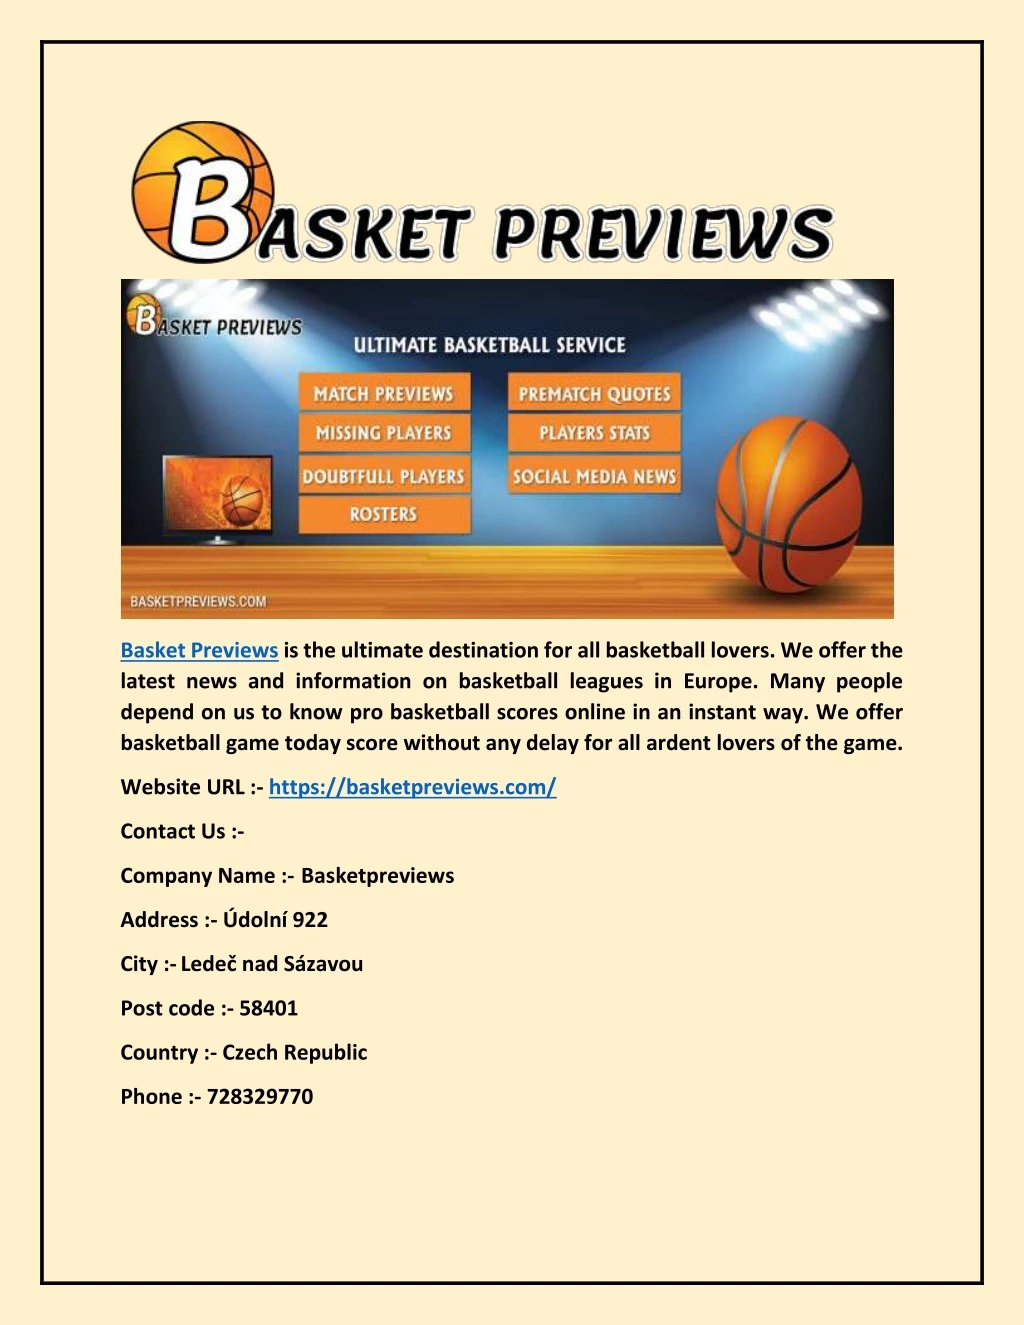 basket previews is the ultimate destination